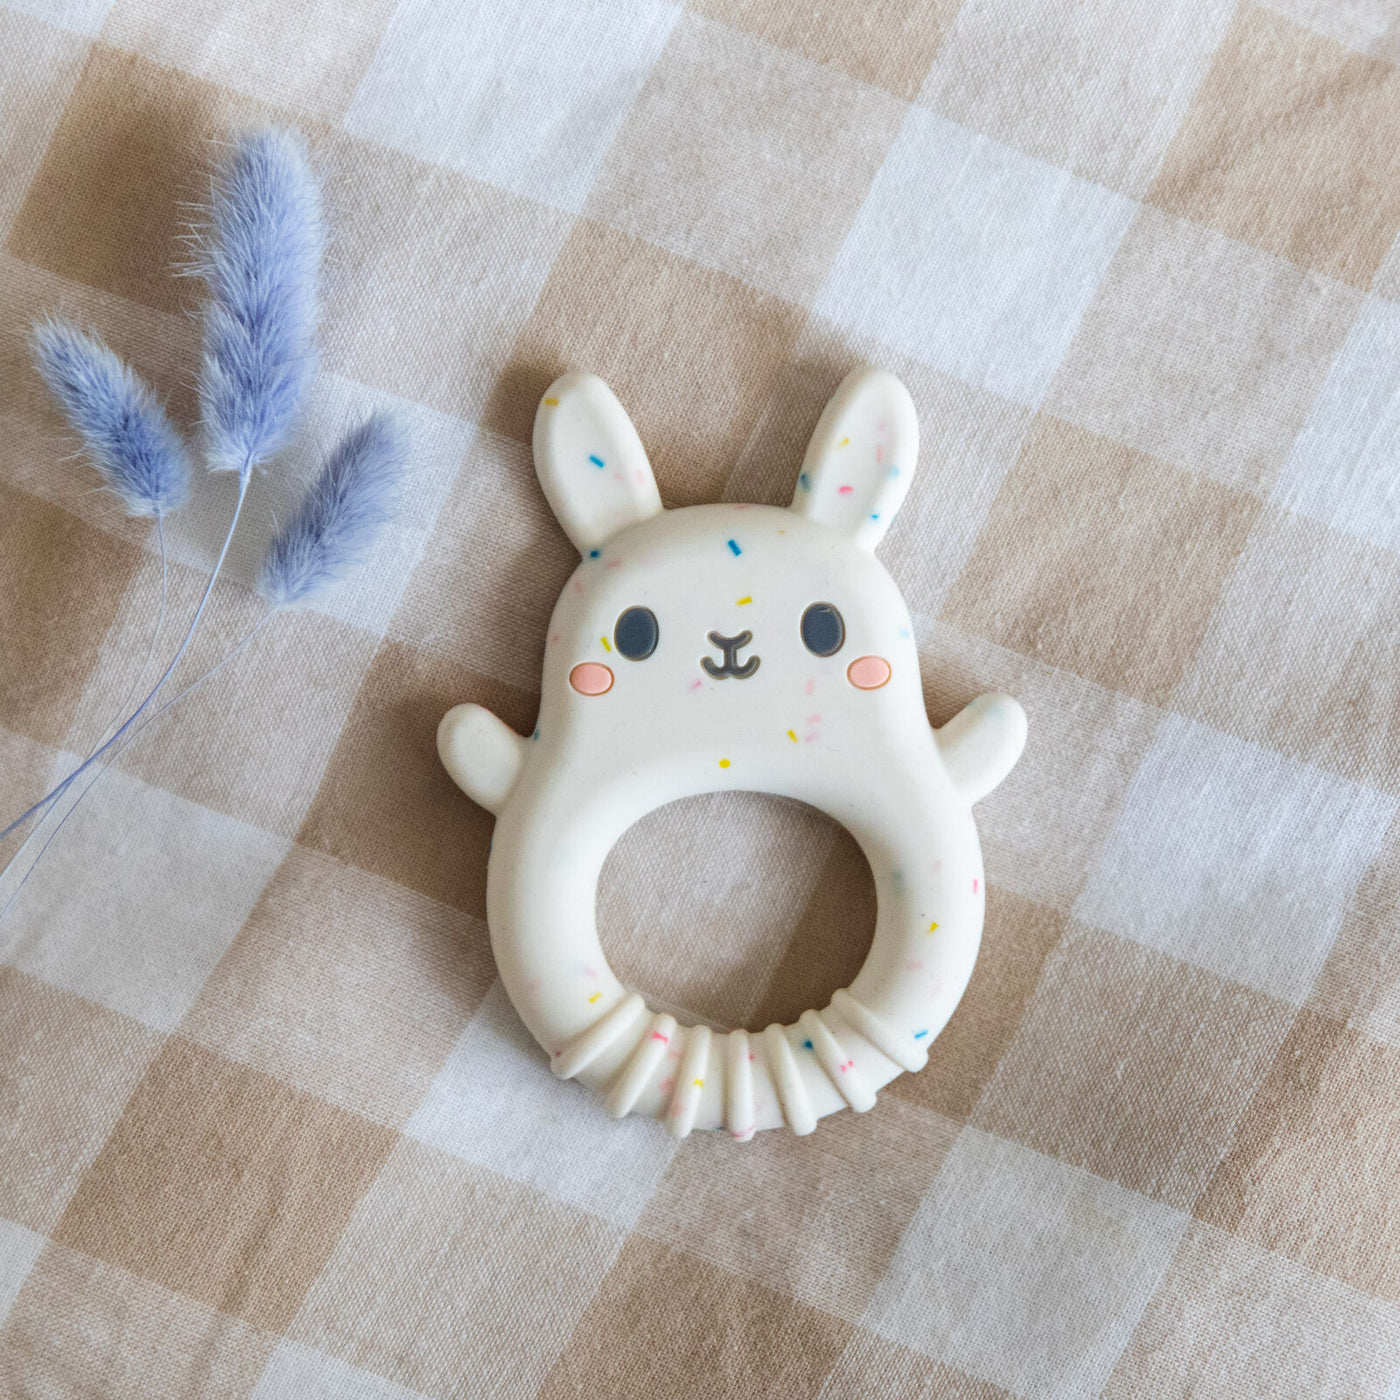 Tiger Tribe - Silicone Teether Bunny